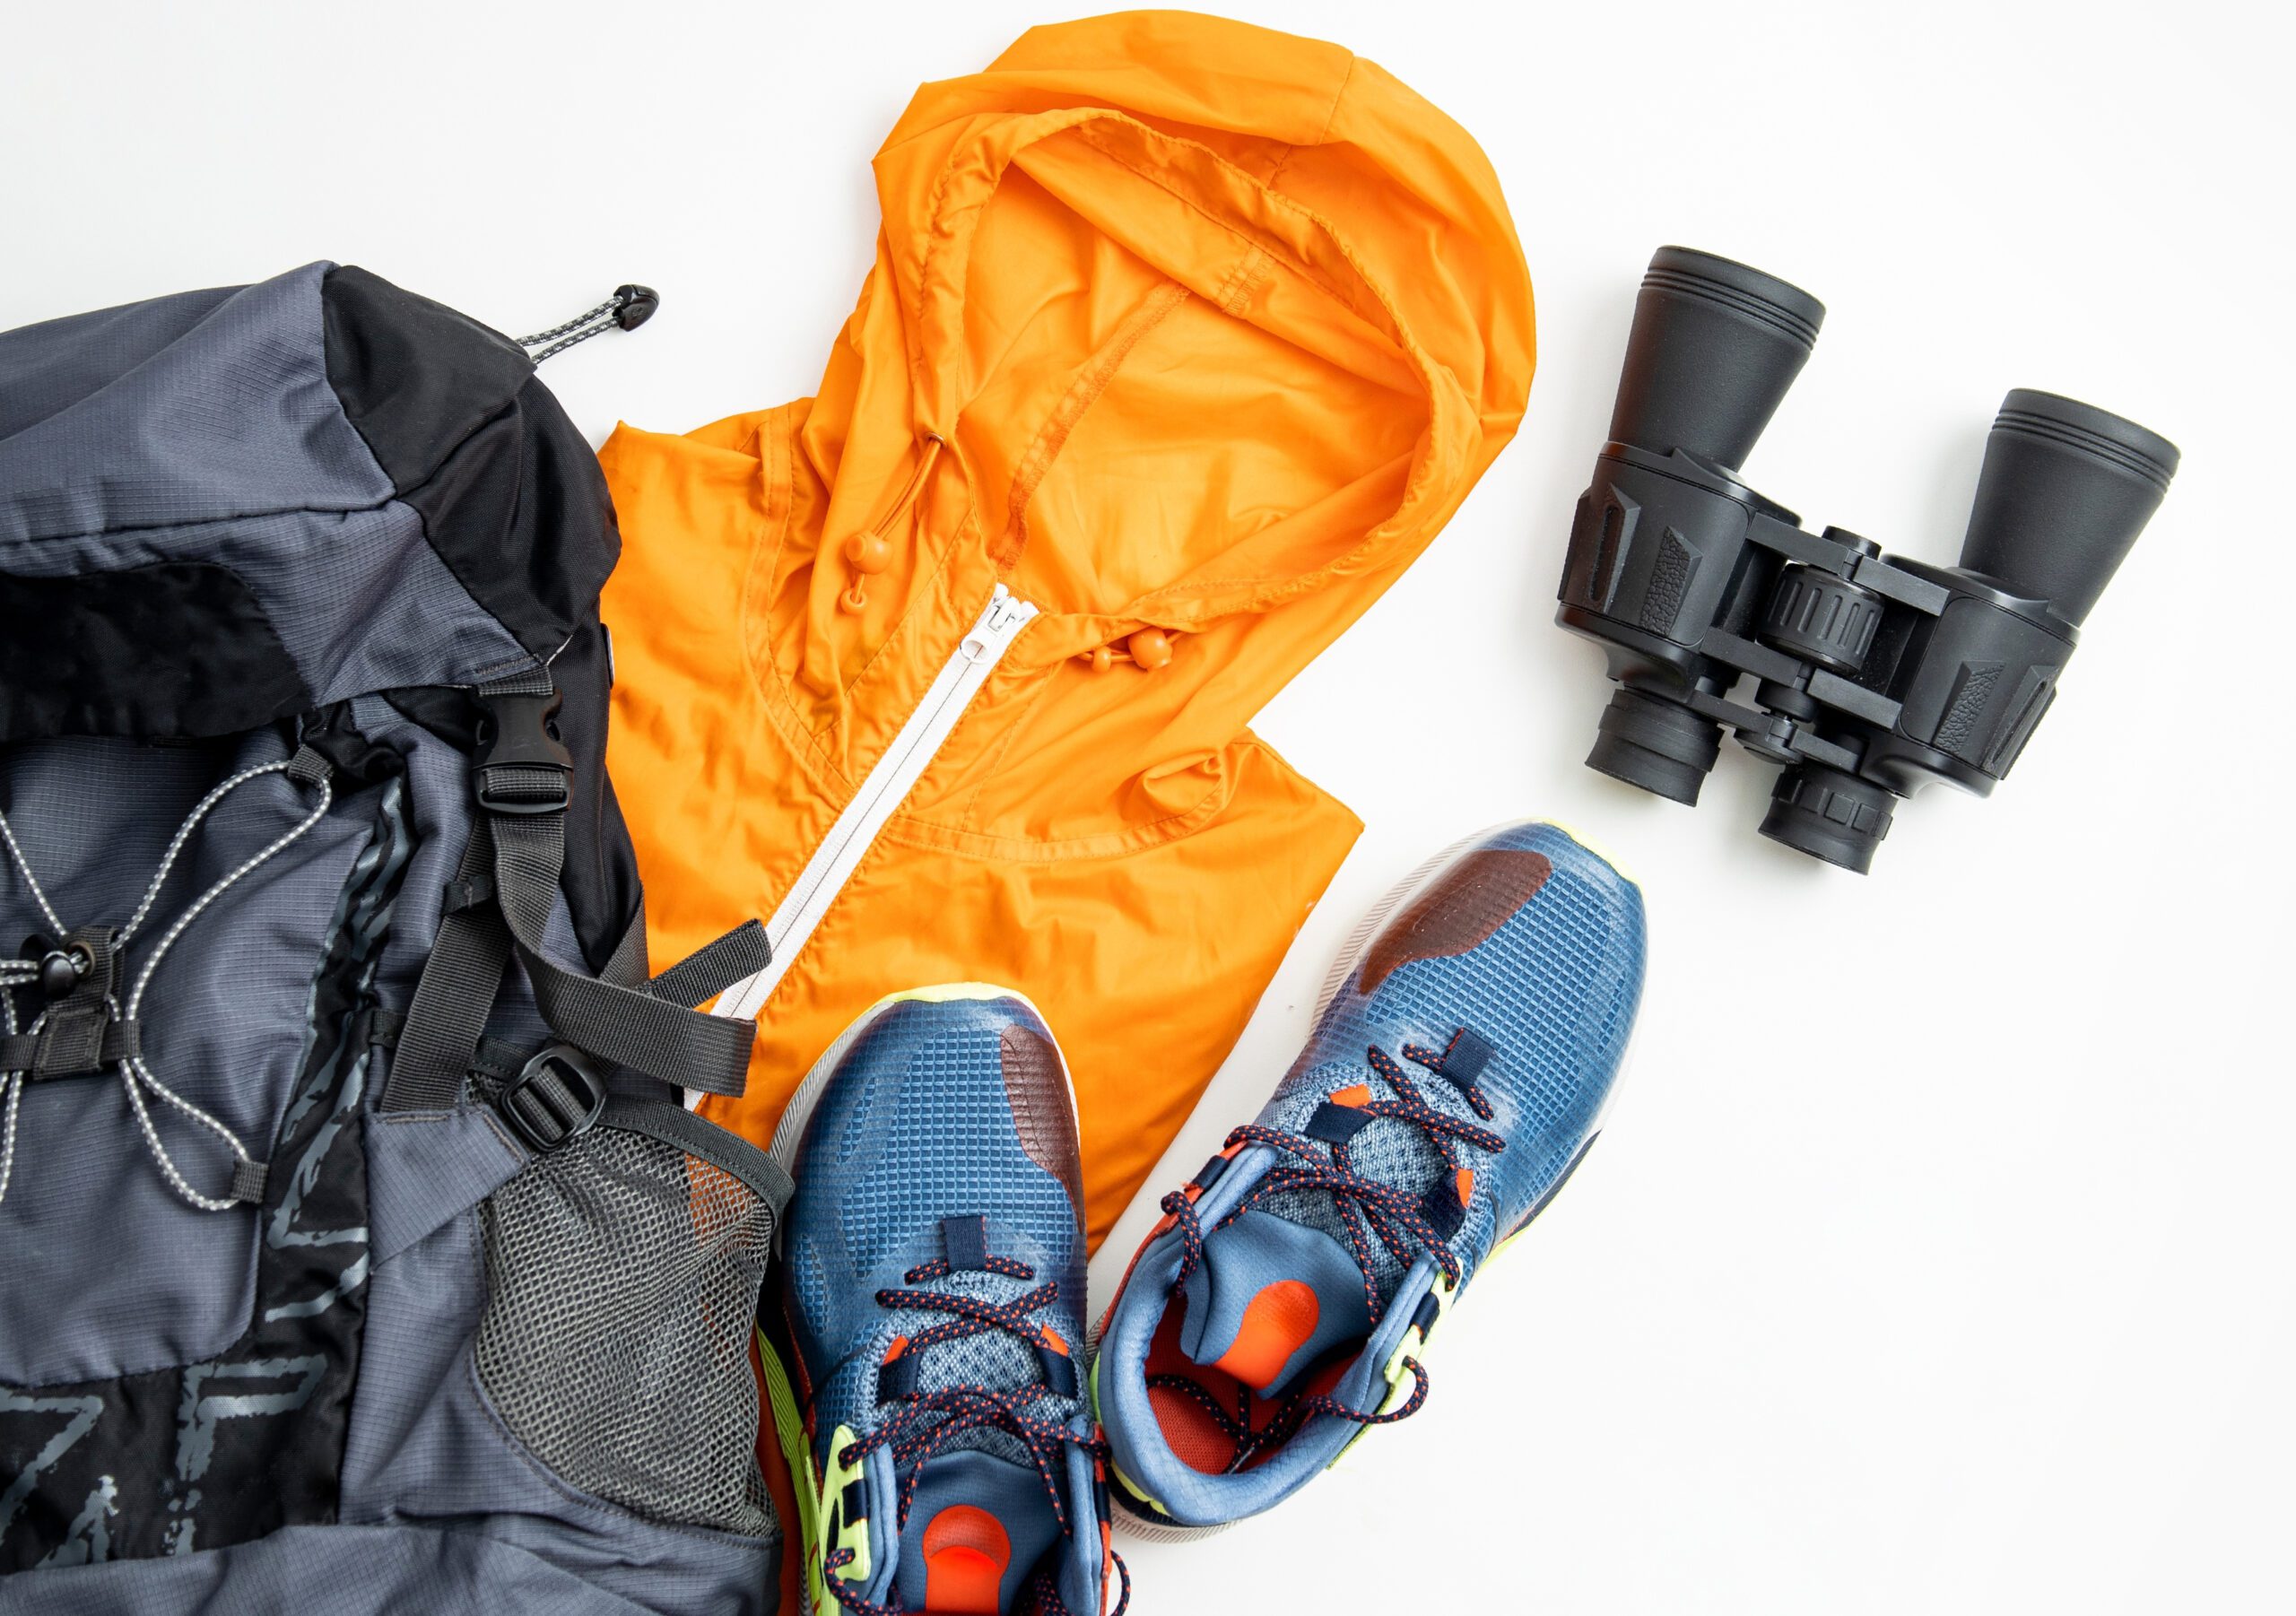 Outdoor Adventure Gear: Organizing Equipment for Expeditions